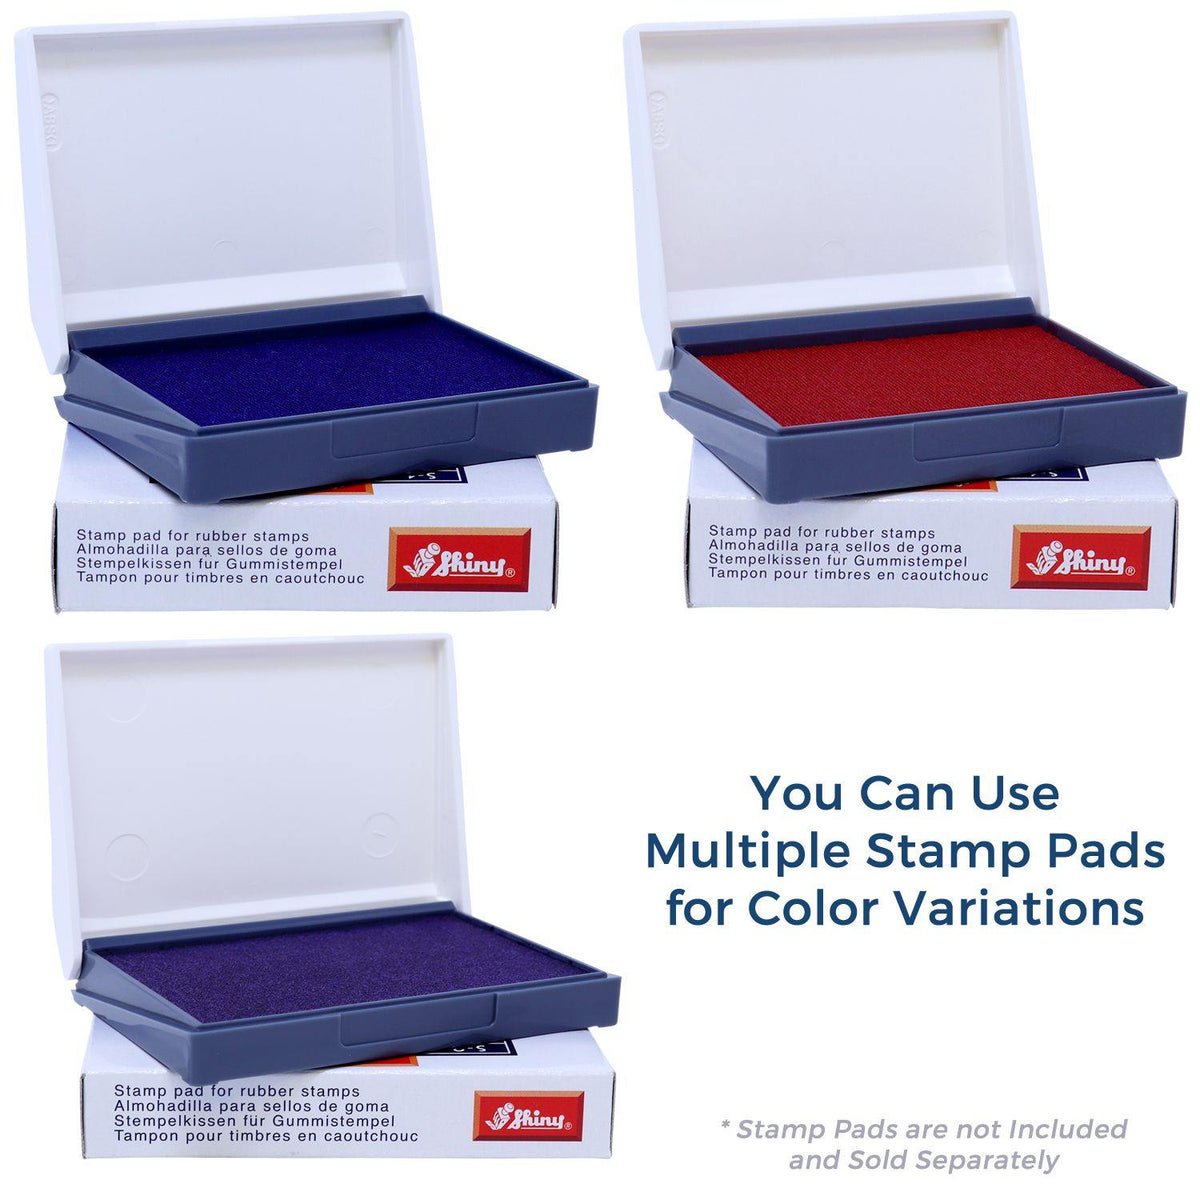 Stamp Pads for Bold Shred Rubber Stamp Available